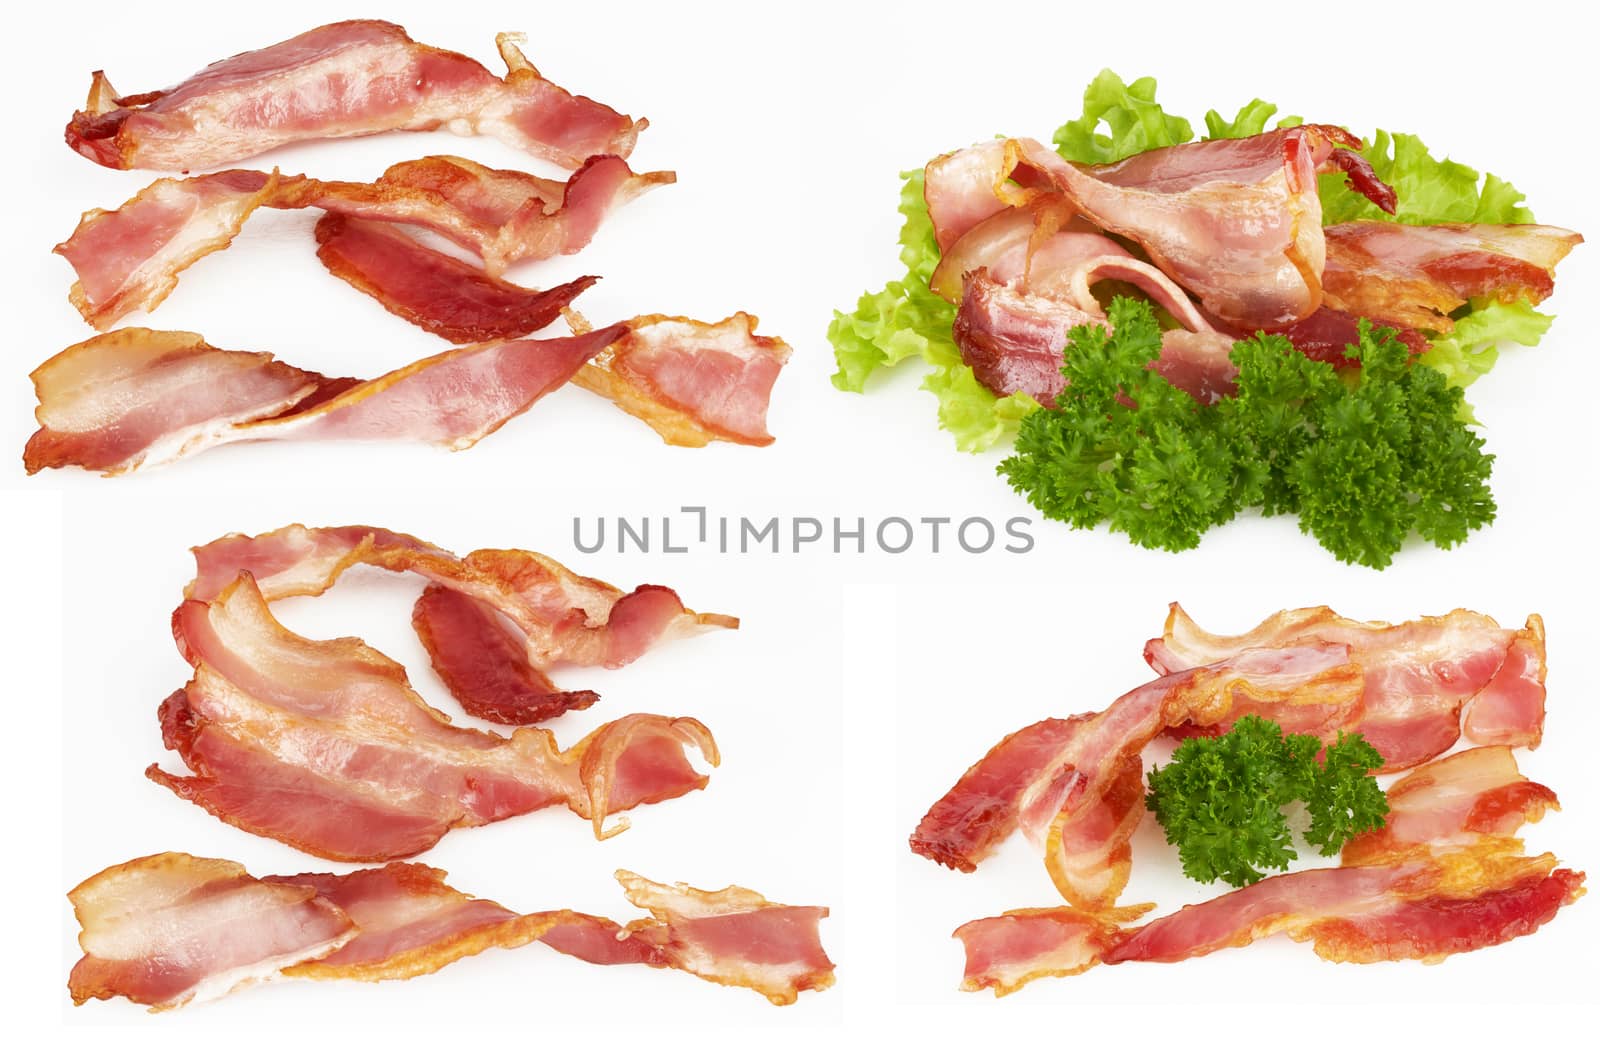 slices of bacon by pioneer111